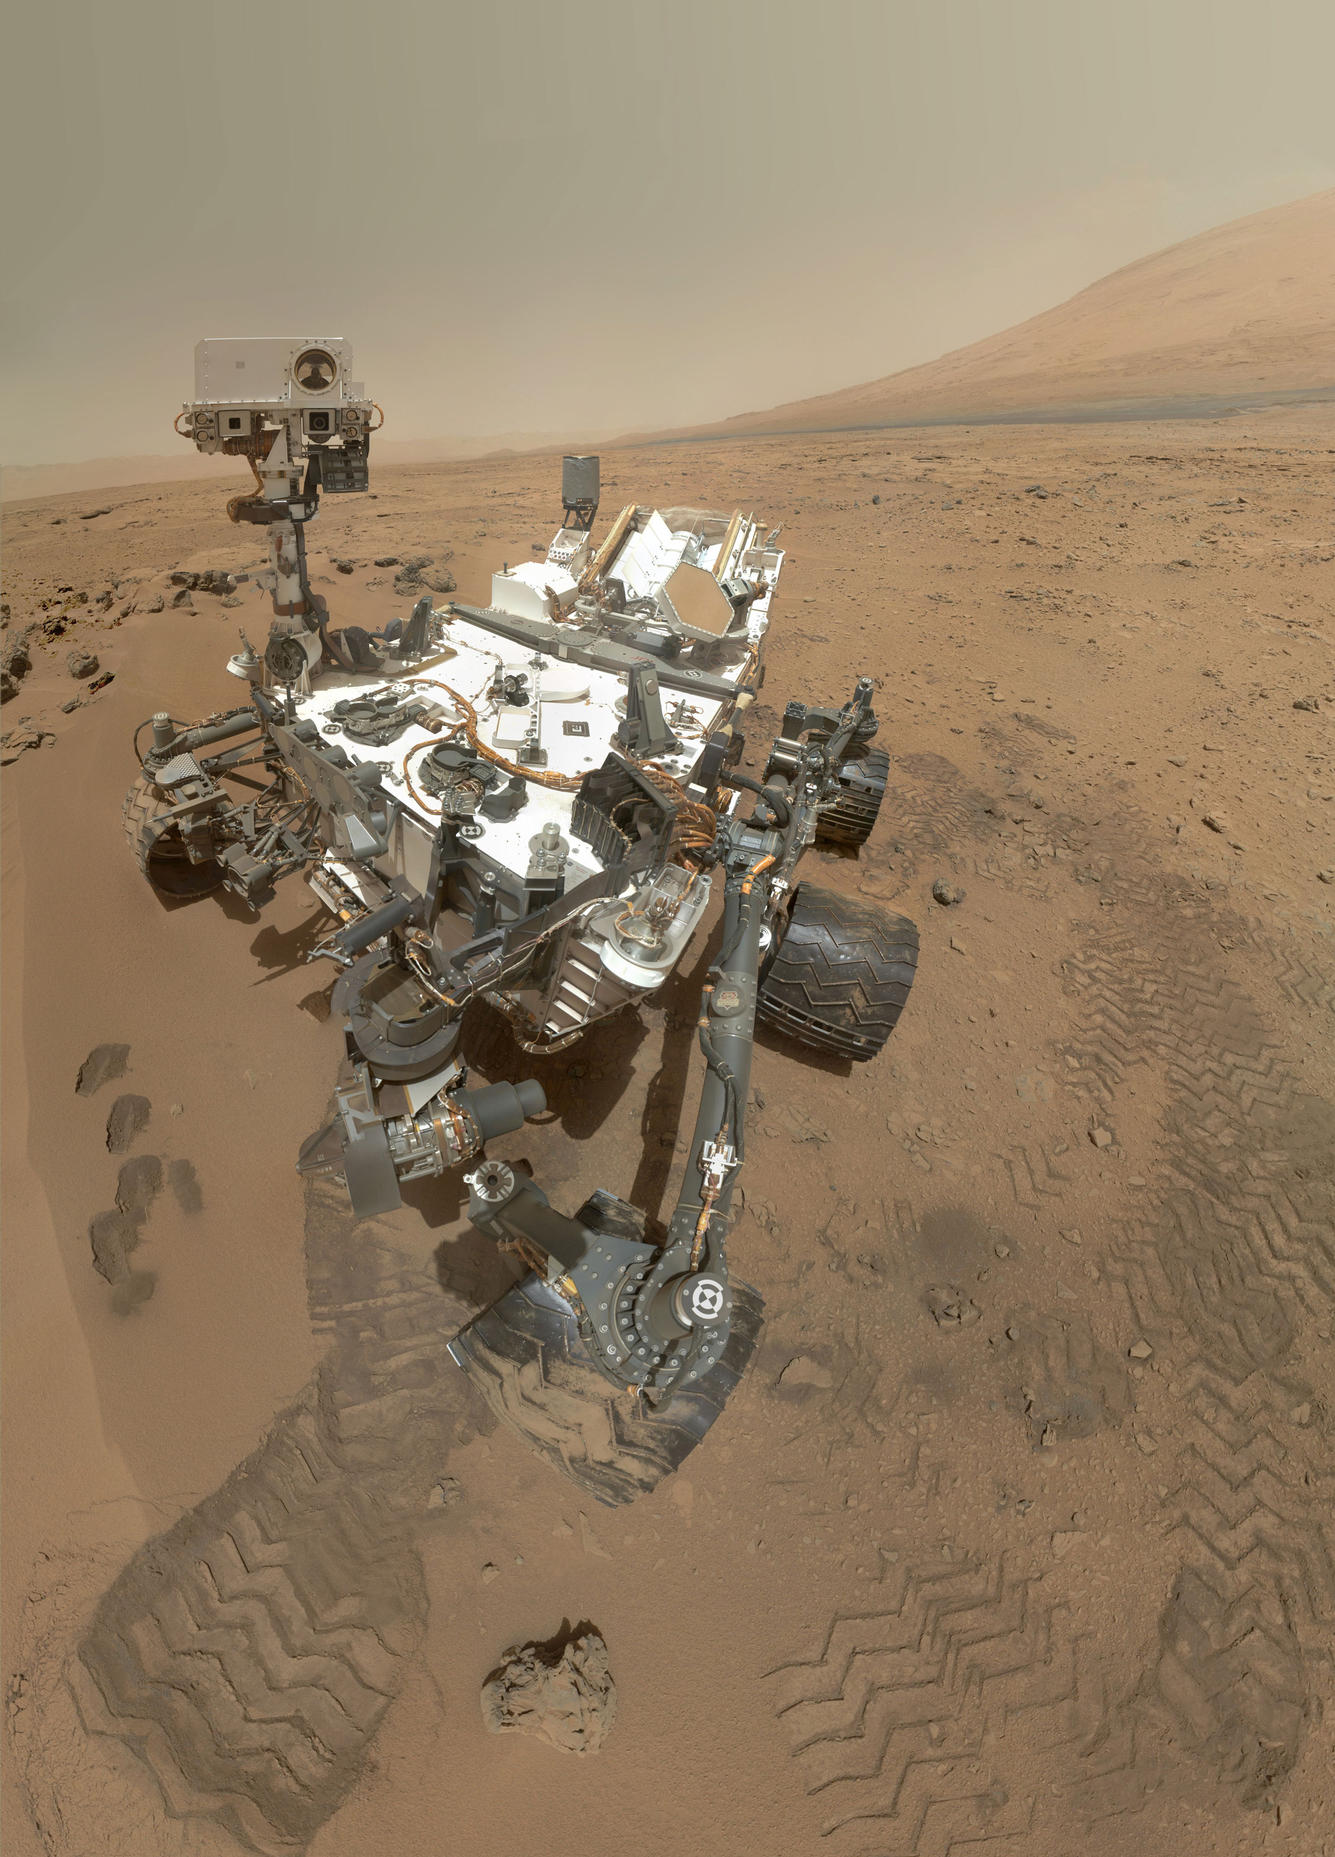 On Sol 84 (Oct. 31, 2012), NASA's Curiosity rover used the Mars Hand Lens Imager (MAHLI) to capture this set of 55 high-resolution images, which were stitched together to create this full-color self-portrait.